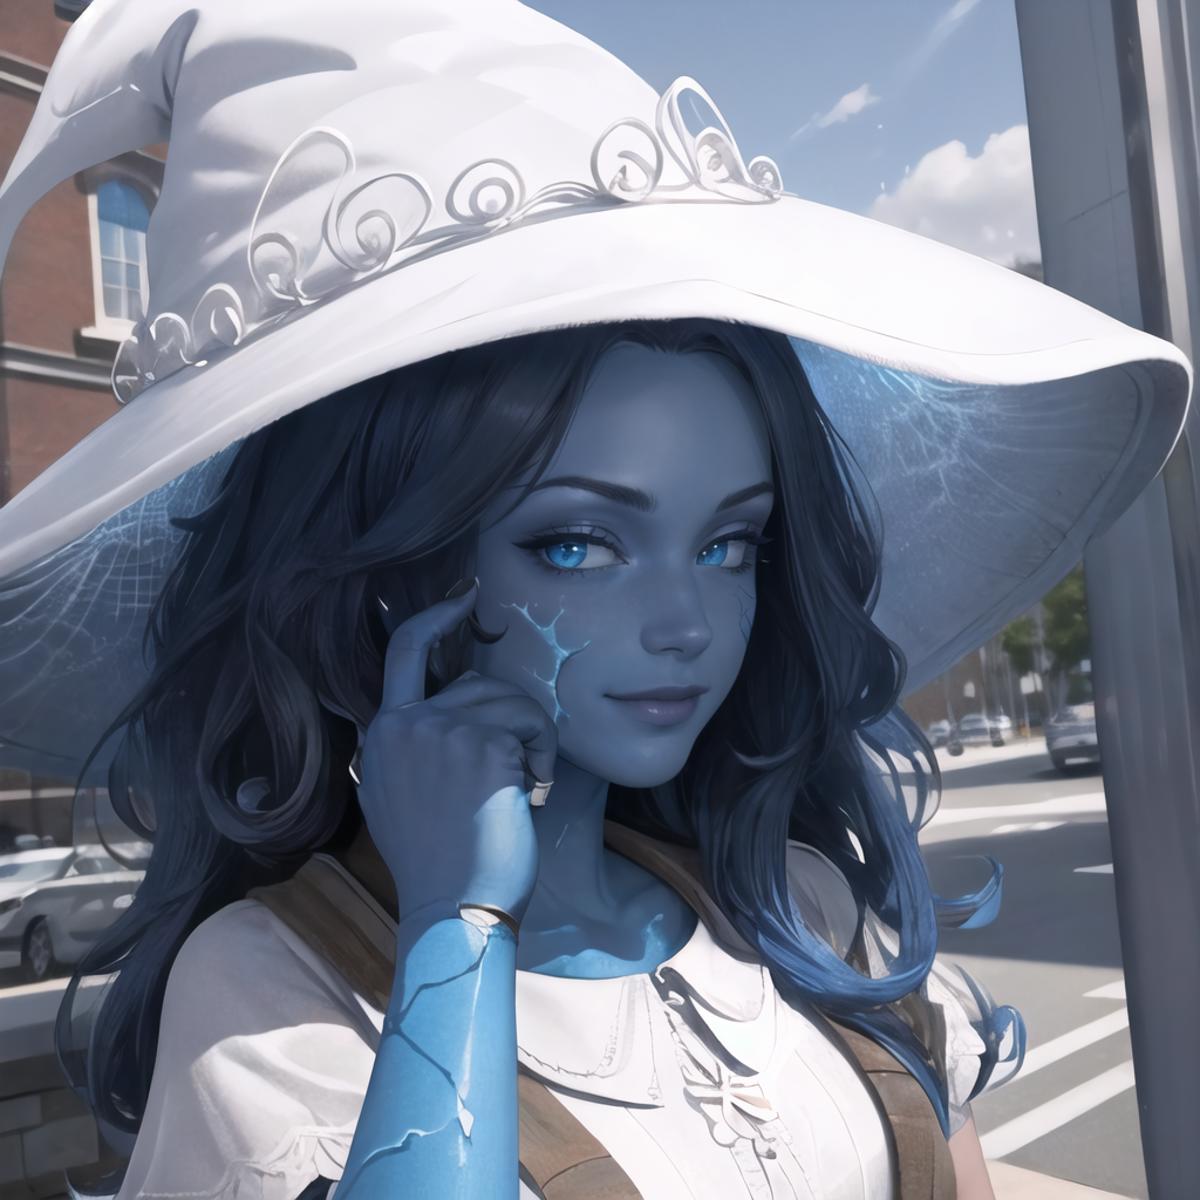 A computer-generated image of a blue-skinned girl wearing a witch's hat and holding a cell phone.